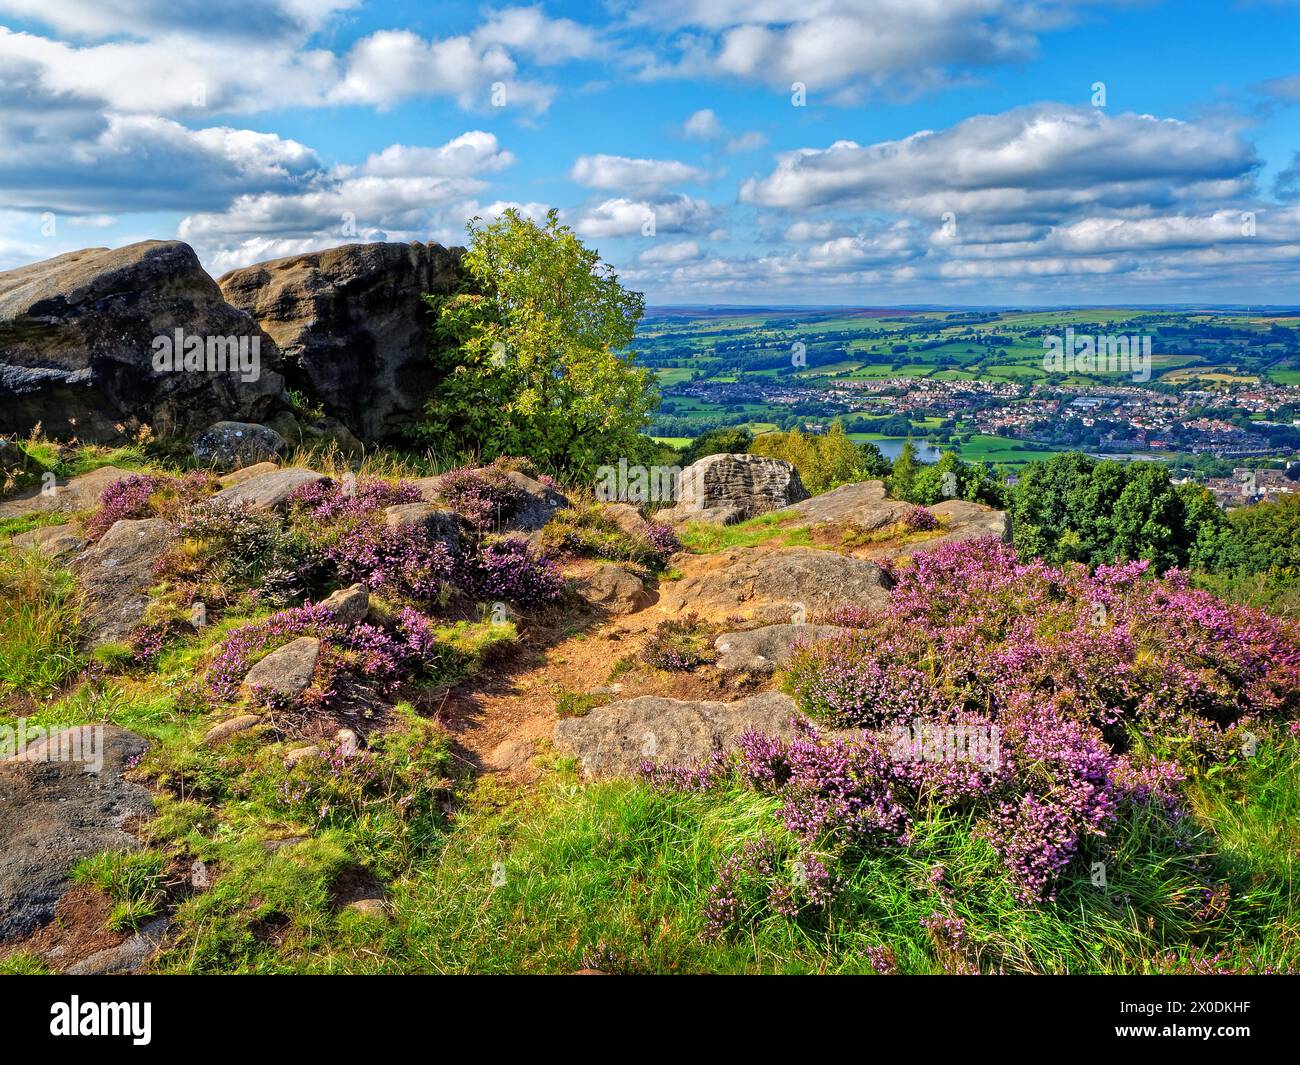 UK, West Yorkshire, Otley, Otley Chevin, Surprise View looking over Otley Town. Stock Photo